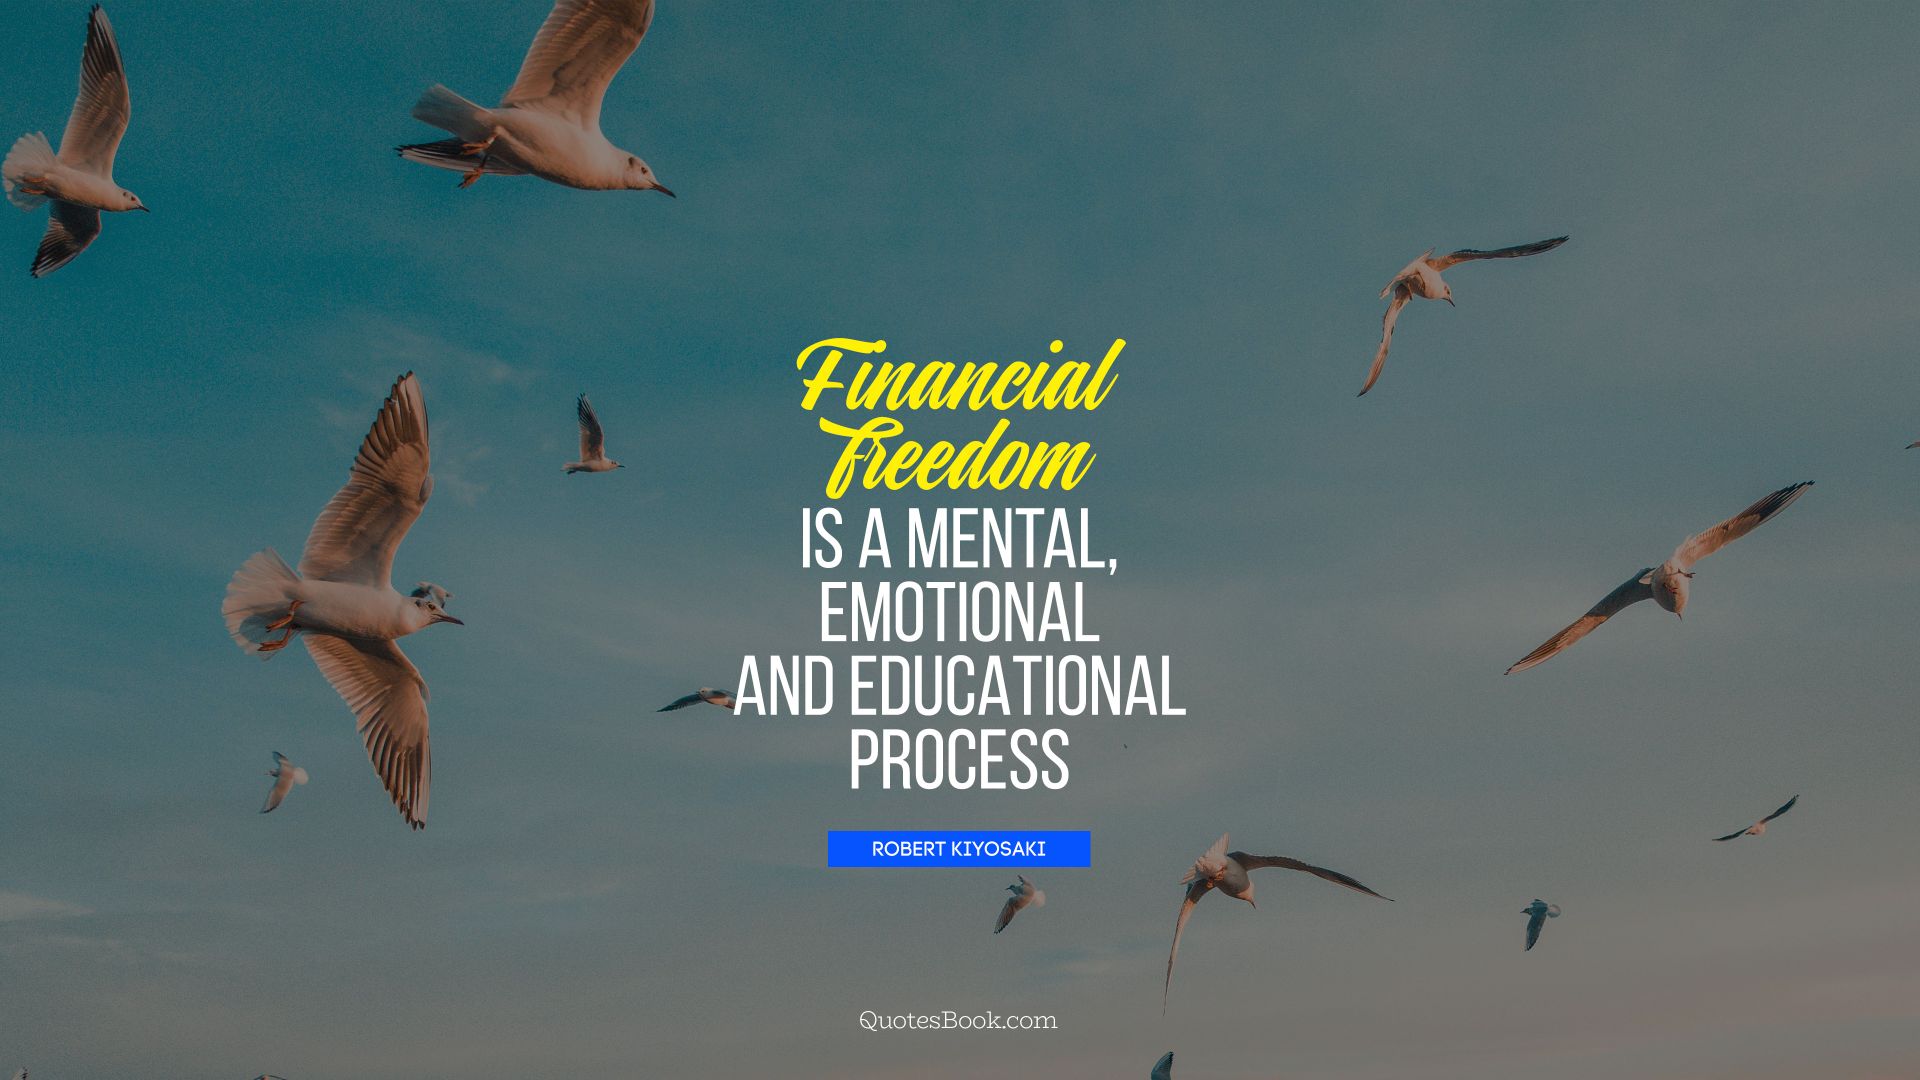 Financial freedom Is a mental, emotional and educational process. - Quote by Robert Kiyosaki